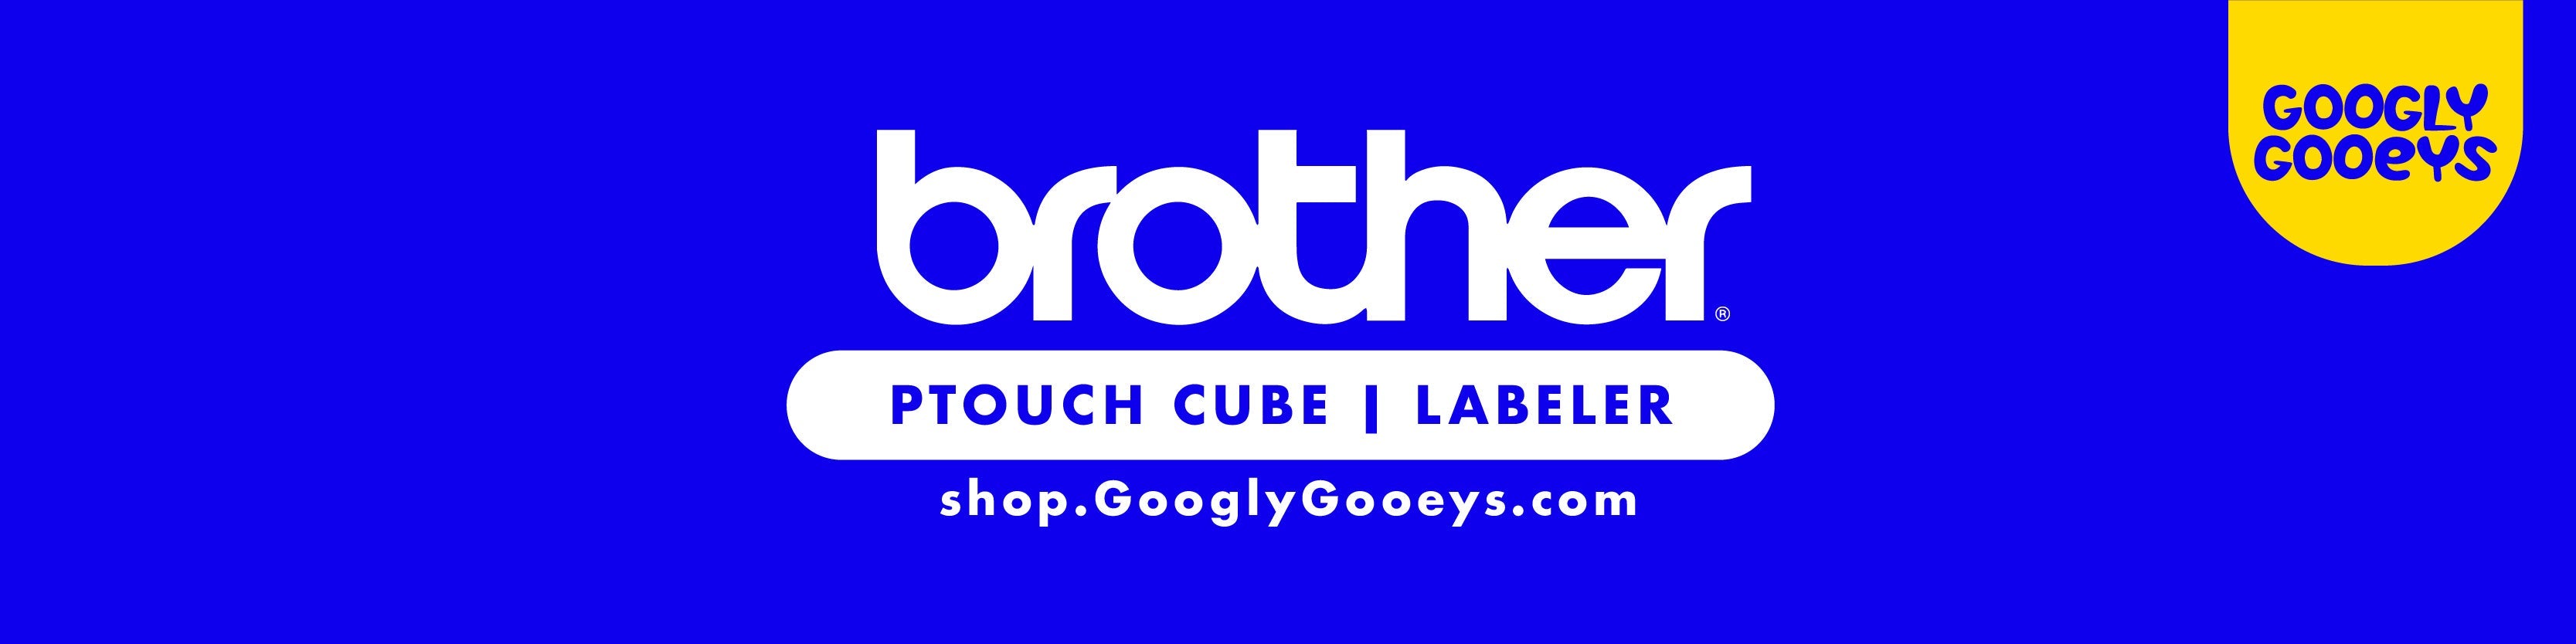 Googly Gooeys Shop - Brother Ptouch P-Touch Cube Labeler Ribbon Printer